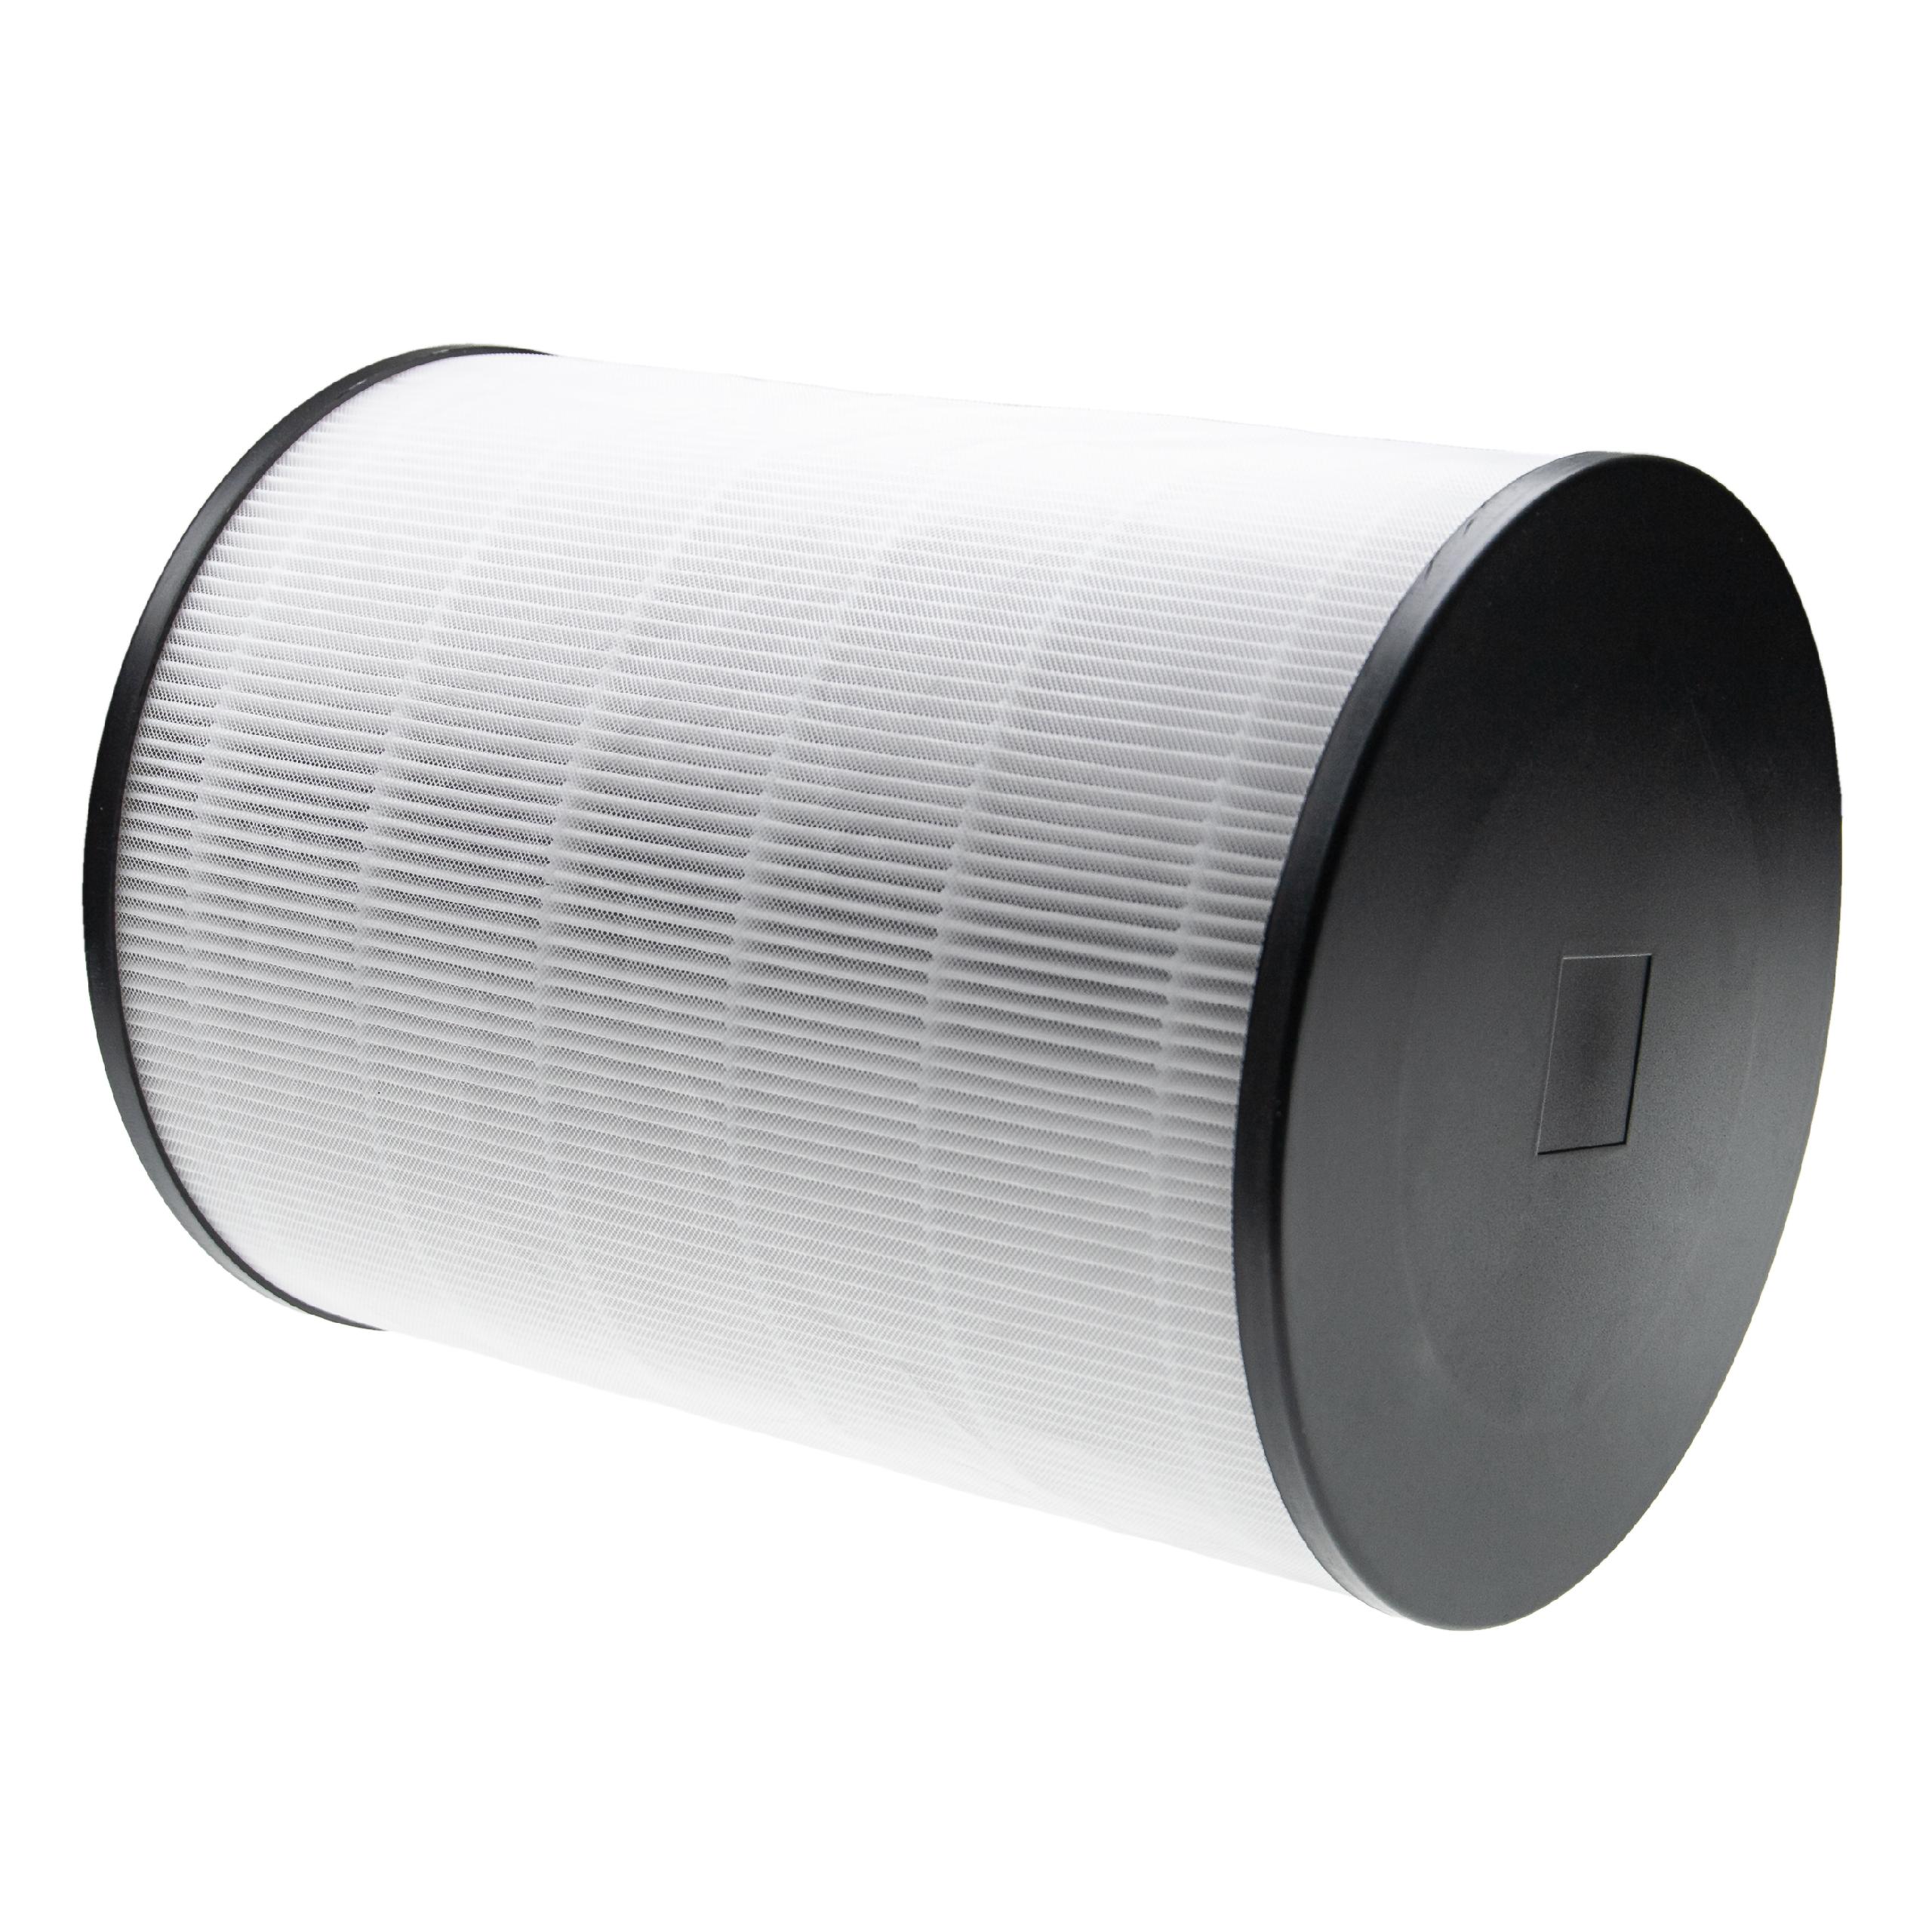 Filter replaces Philips FY3430/30 for Air Purifier